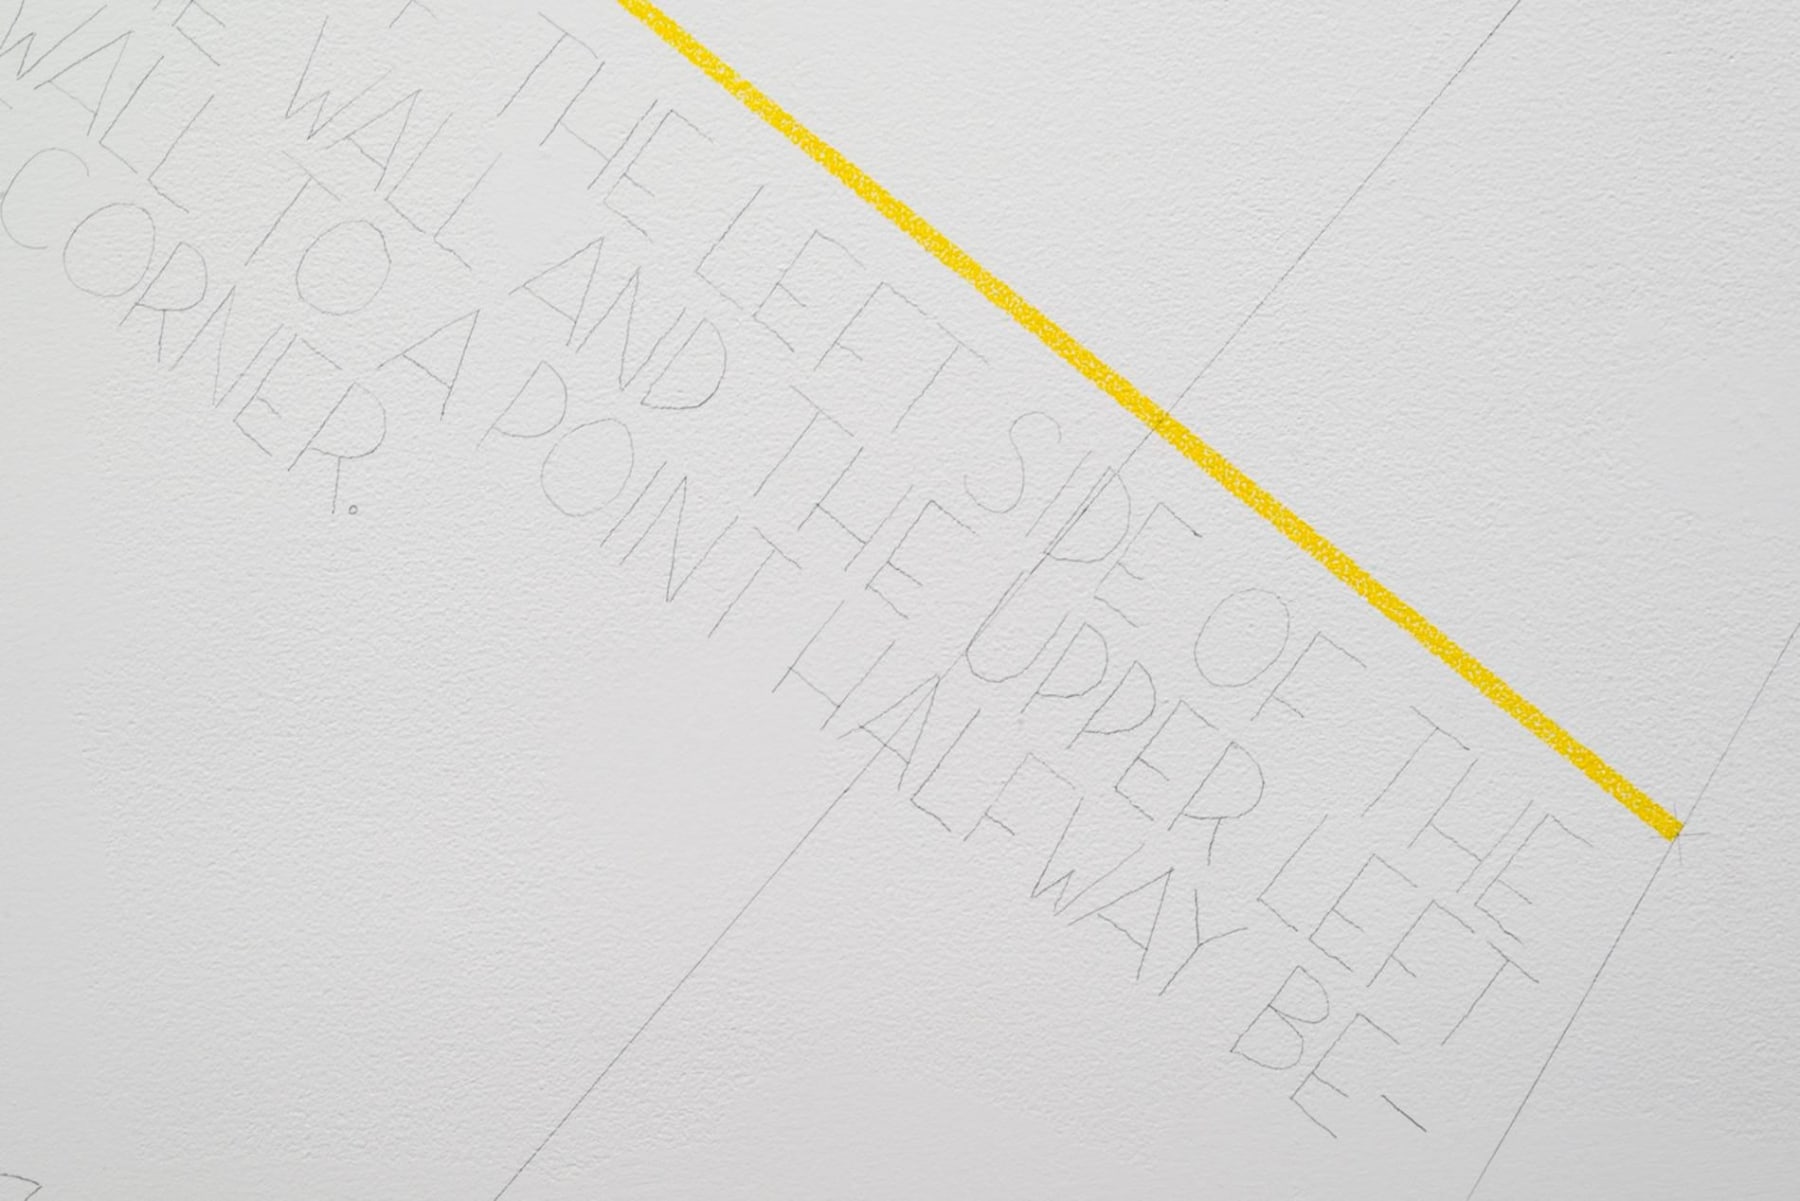 yellow line with text underneath it drawn directly on the wall